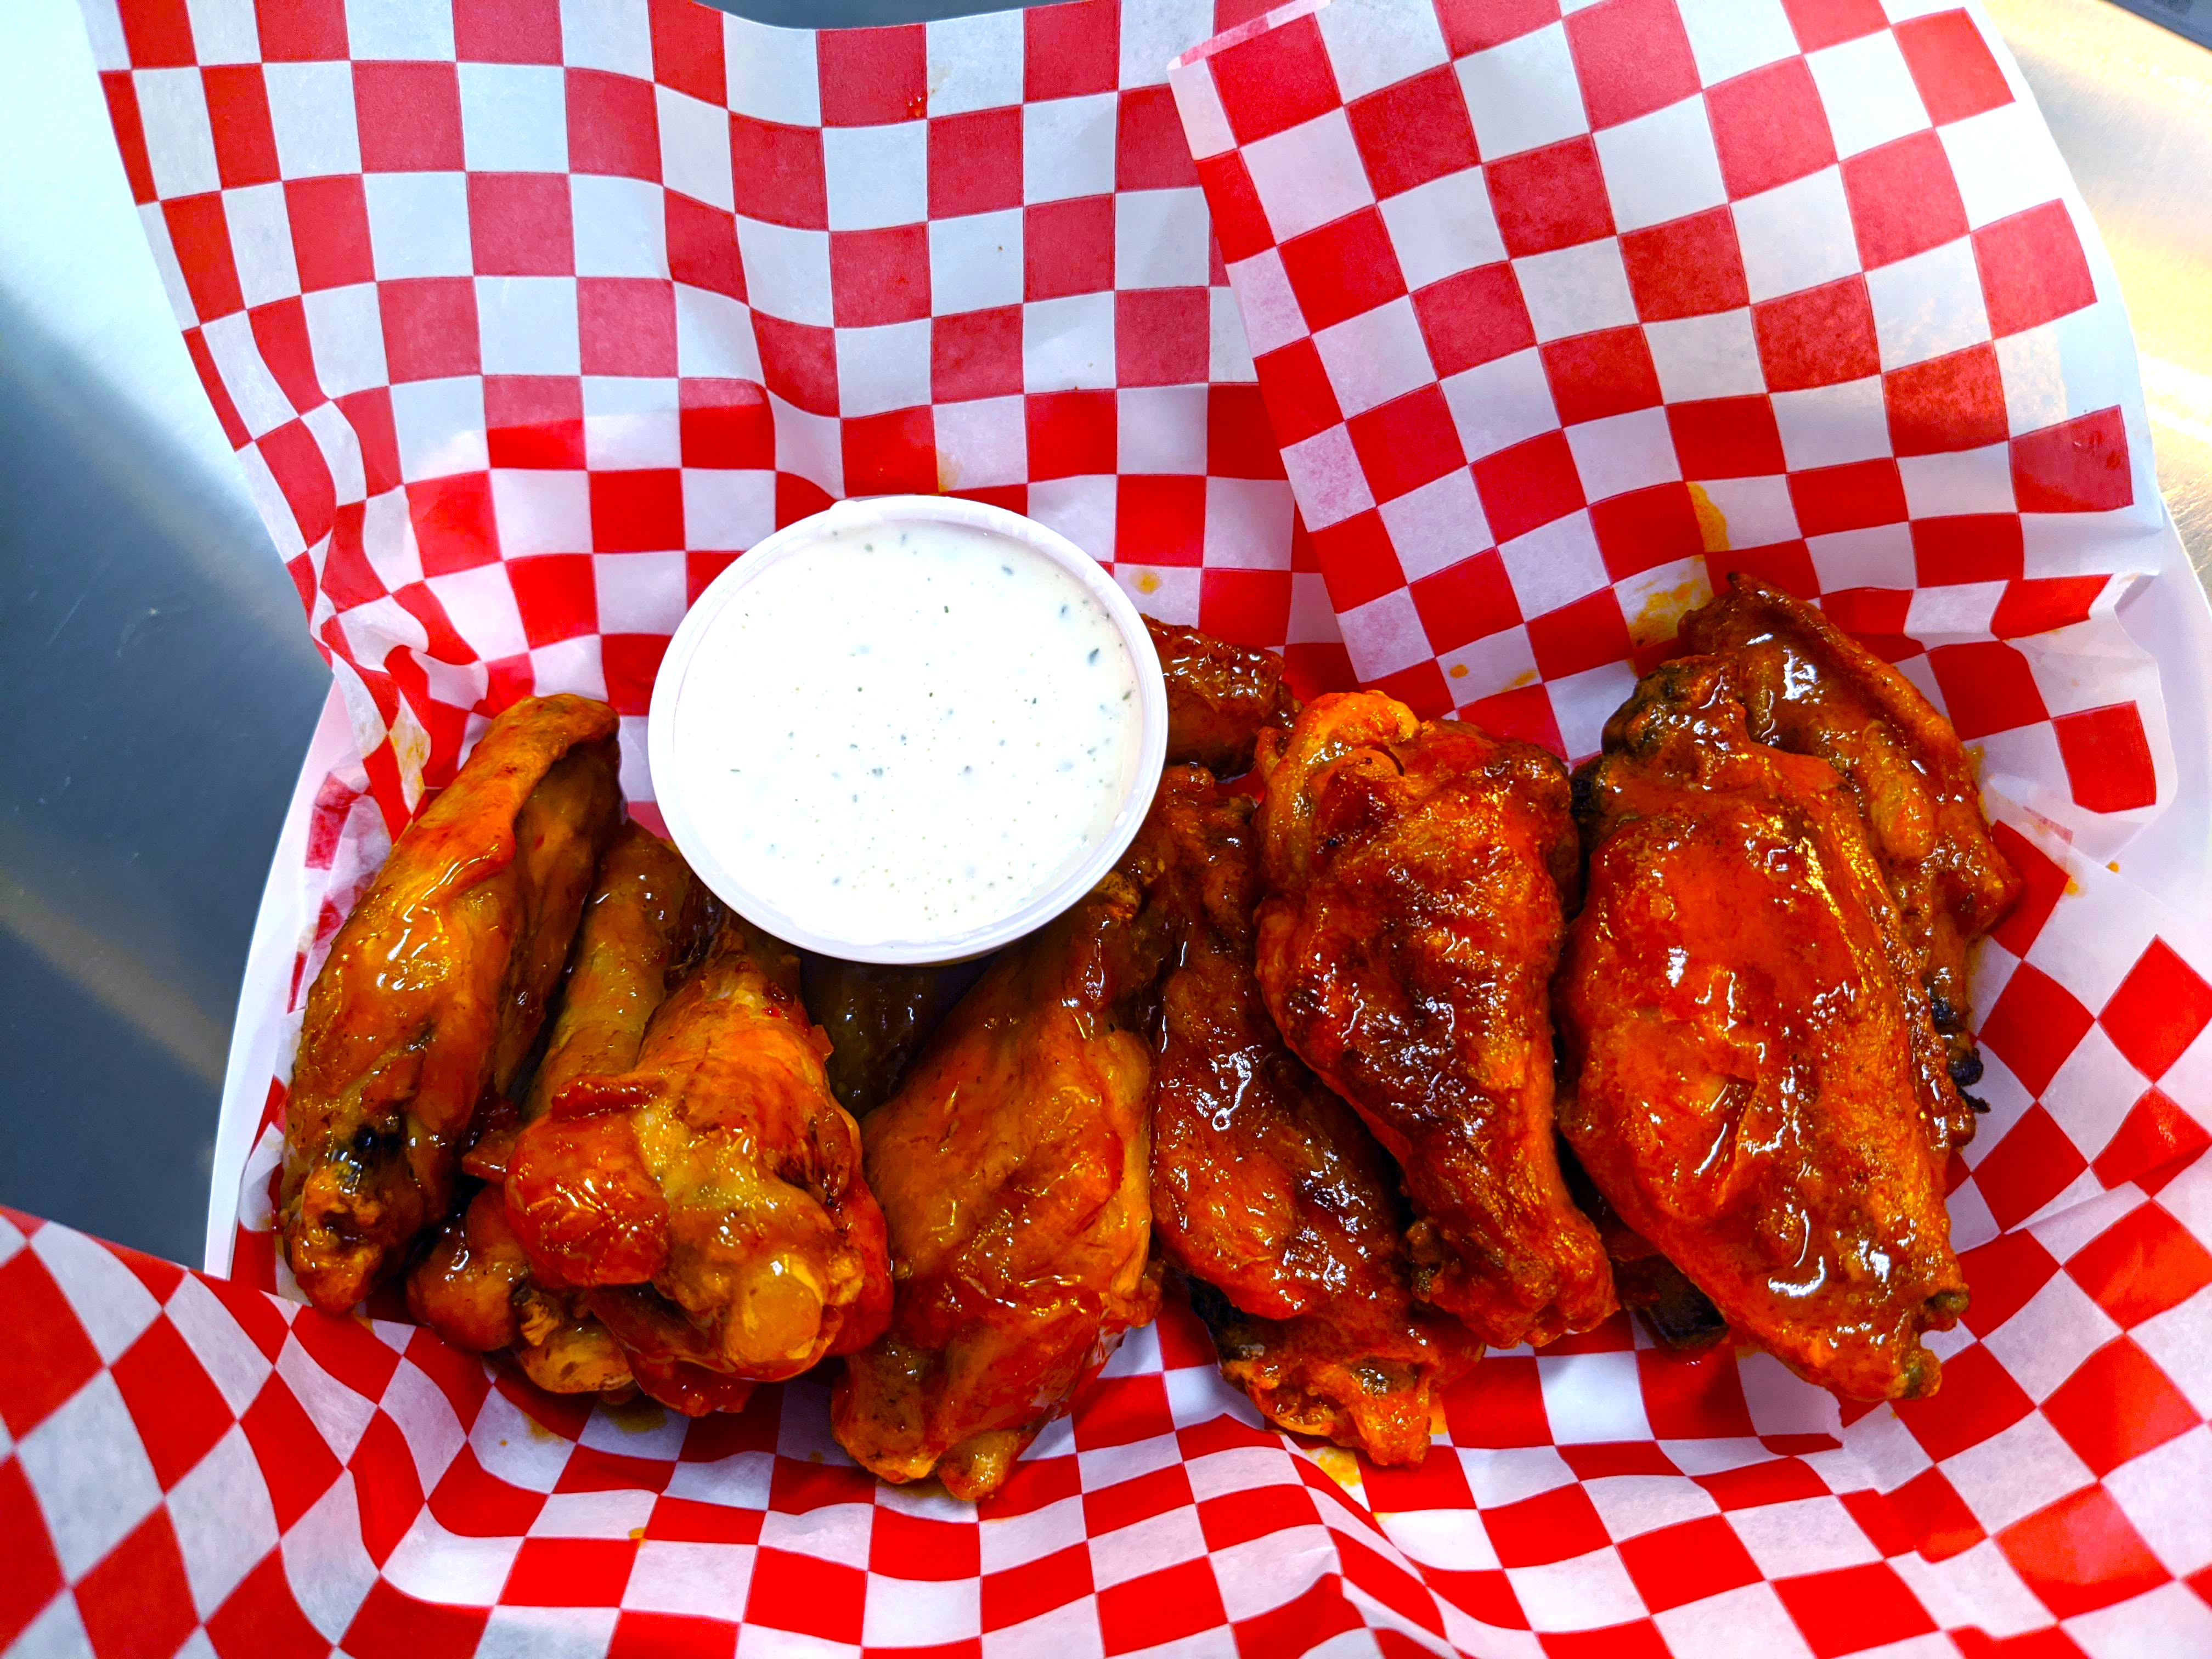 a basket of chicken wings with ranch dipping sauce